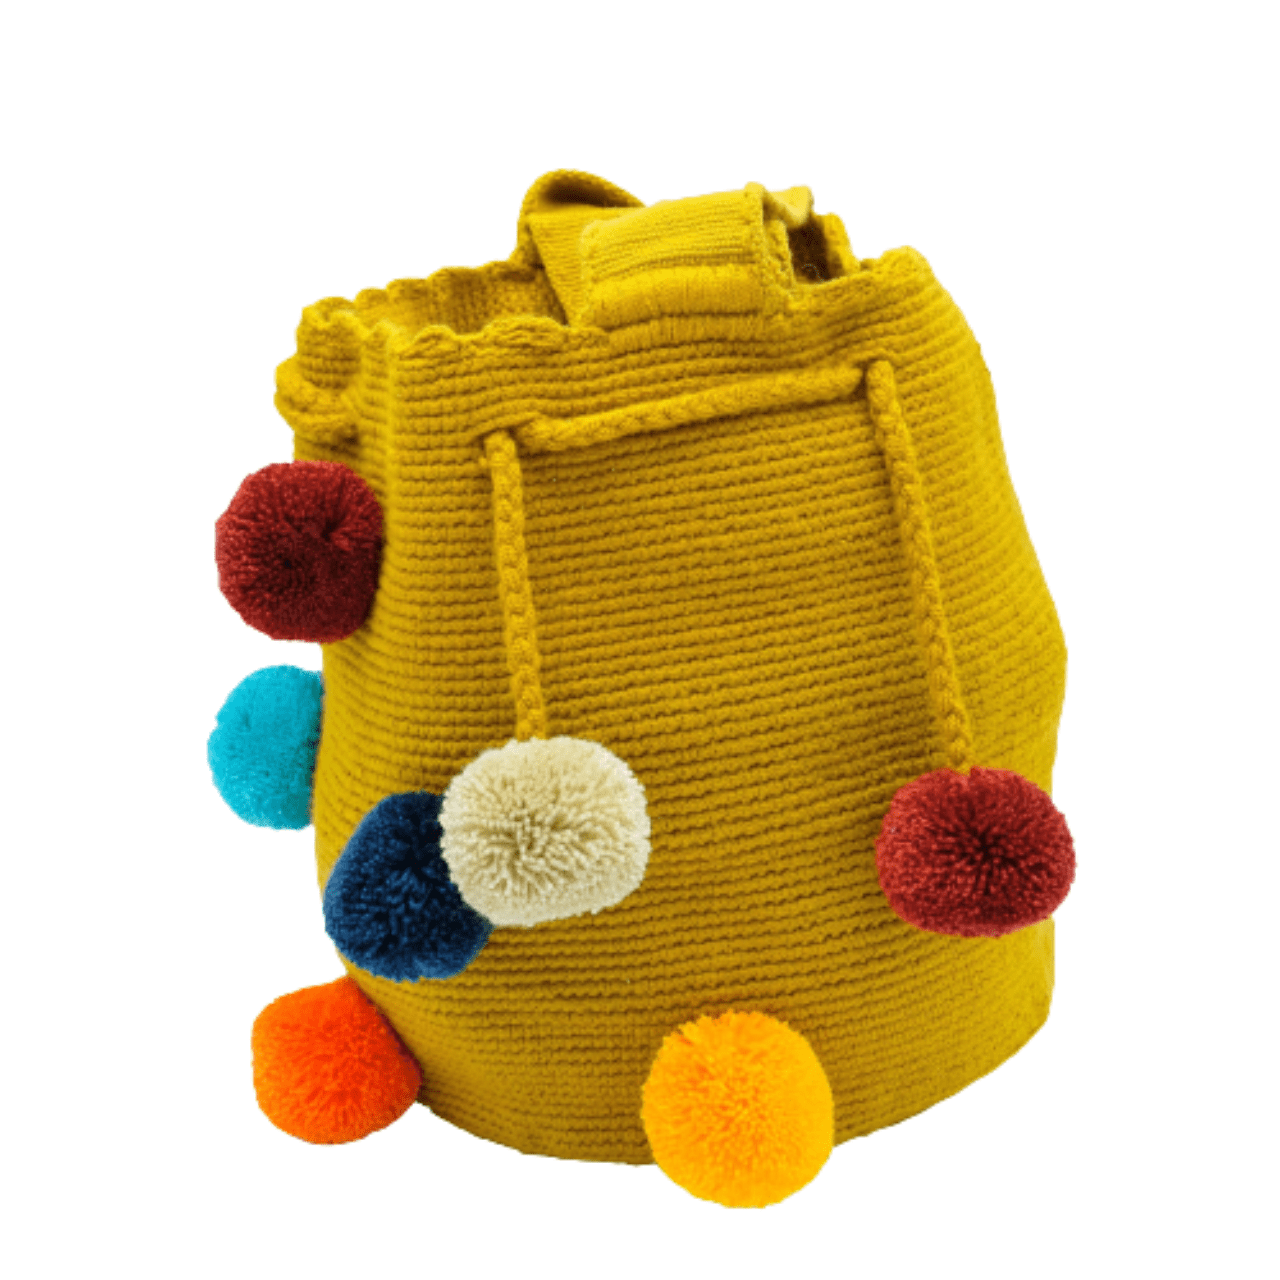  Koya crochet bag Medium in yellow color with vibrant pom poms, a stylish and eye-catching accessory.